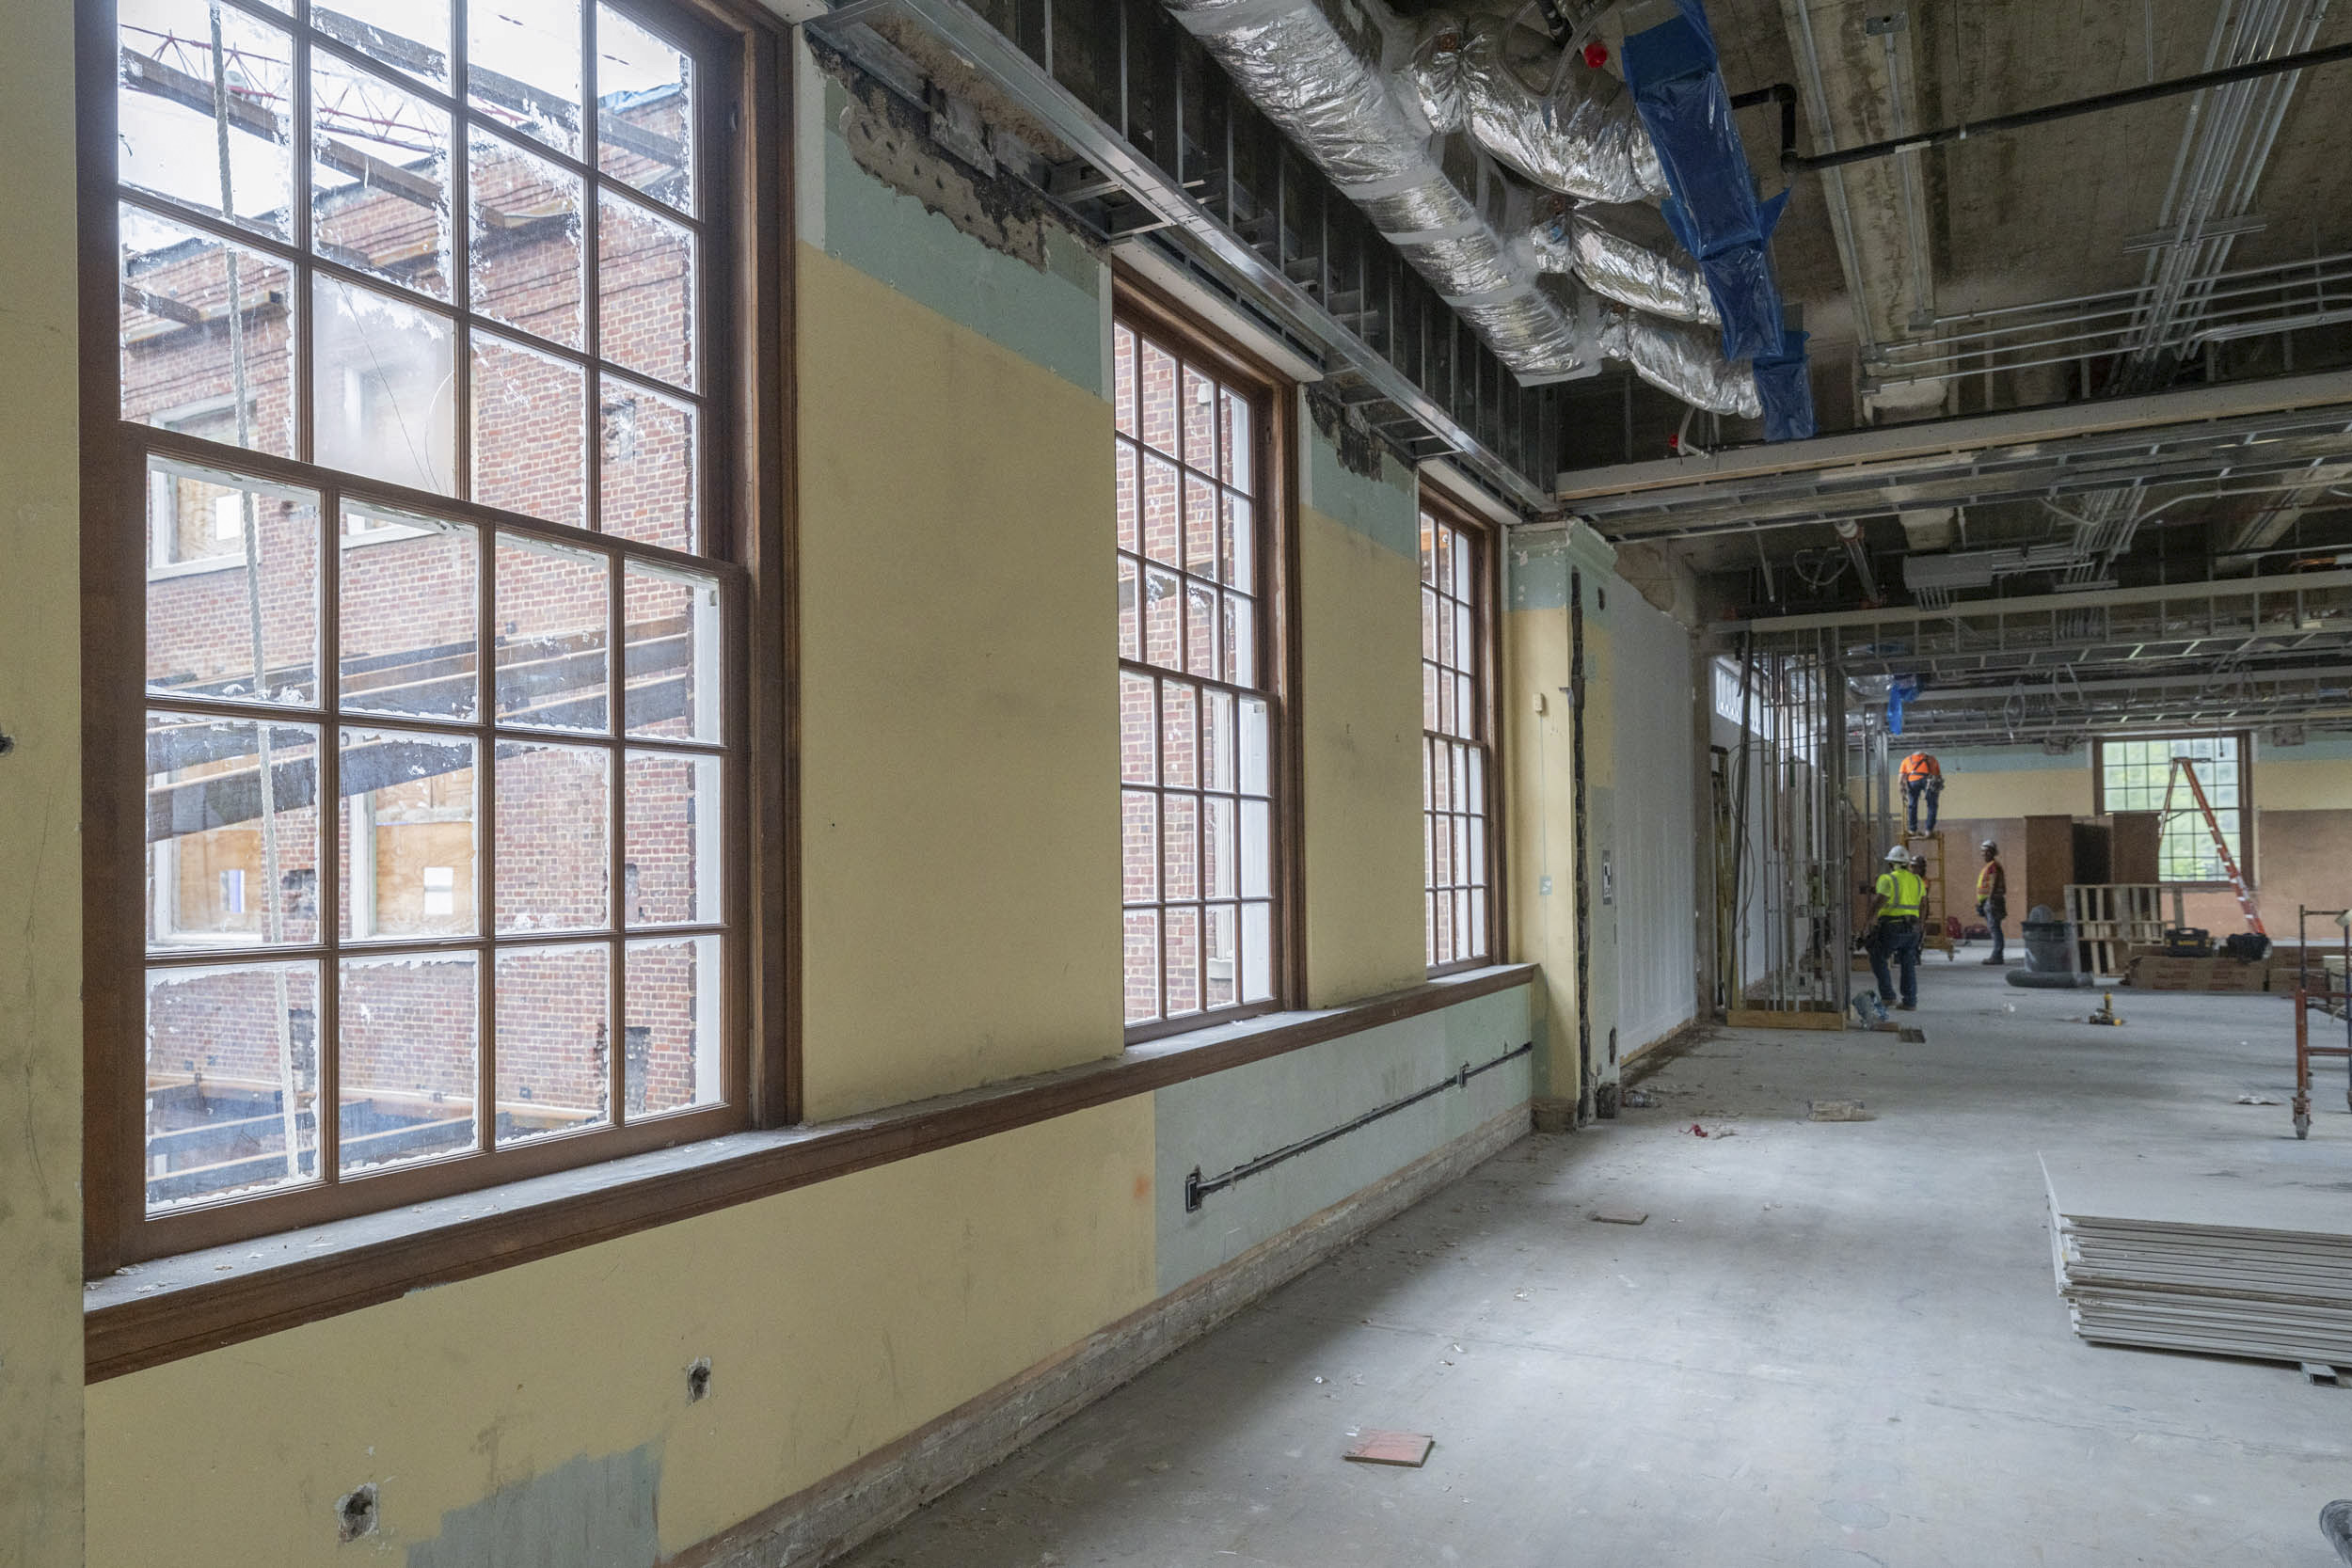 Inside the gutted Alderman Library with Construction workers working